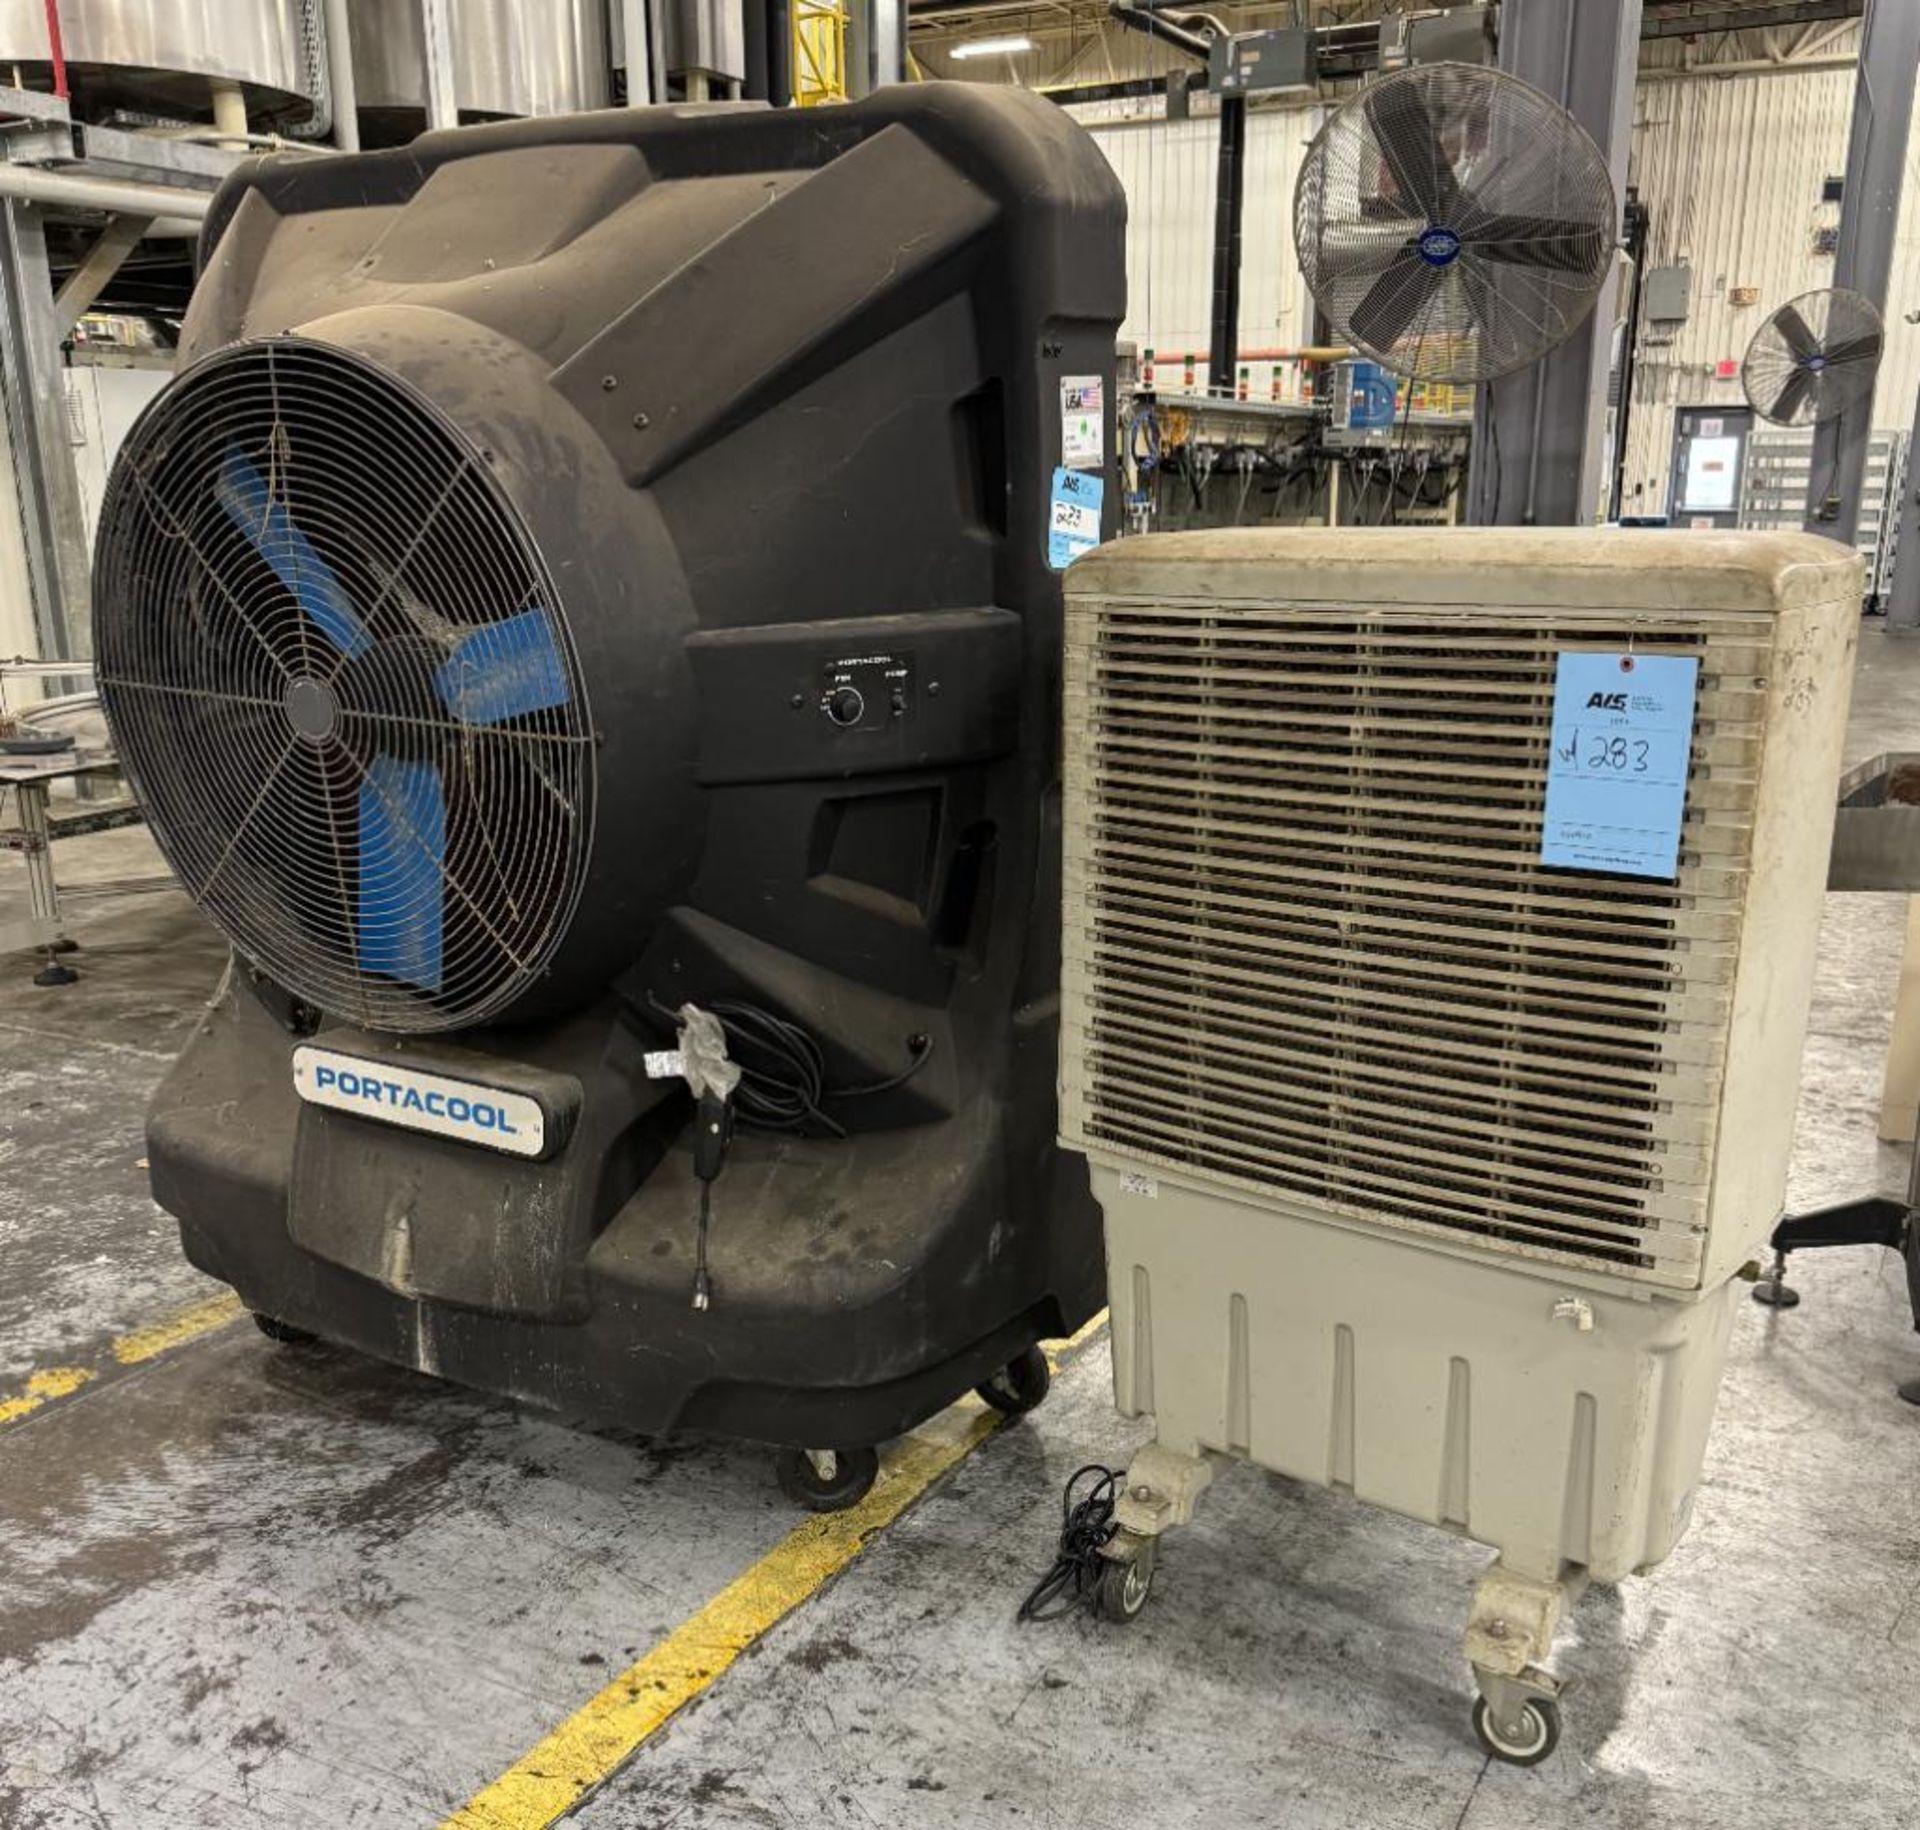 Lot Of (2) Cooling Fans. With (1) Portacool Jetstream 260, (1) Global Industrial.